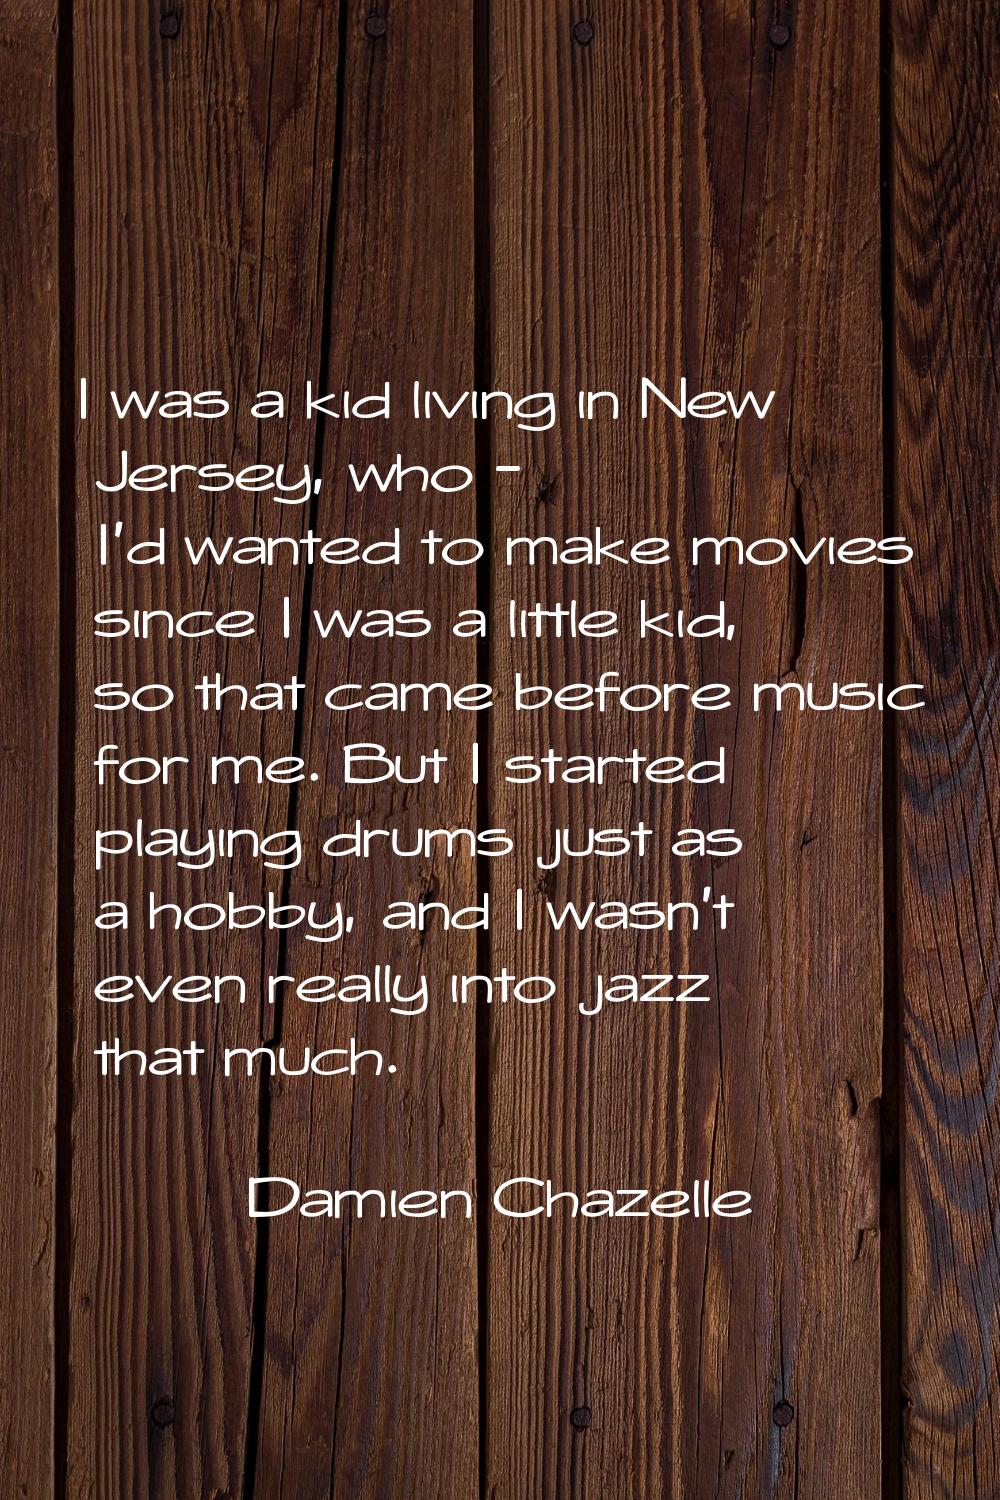 I was a kid living in New Jersey, who - I'd wanted to make movies since I was a little kid, so that